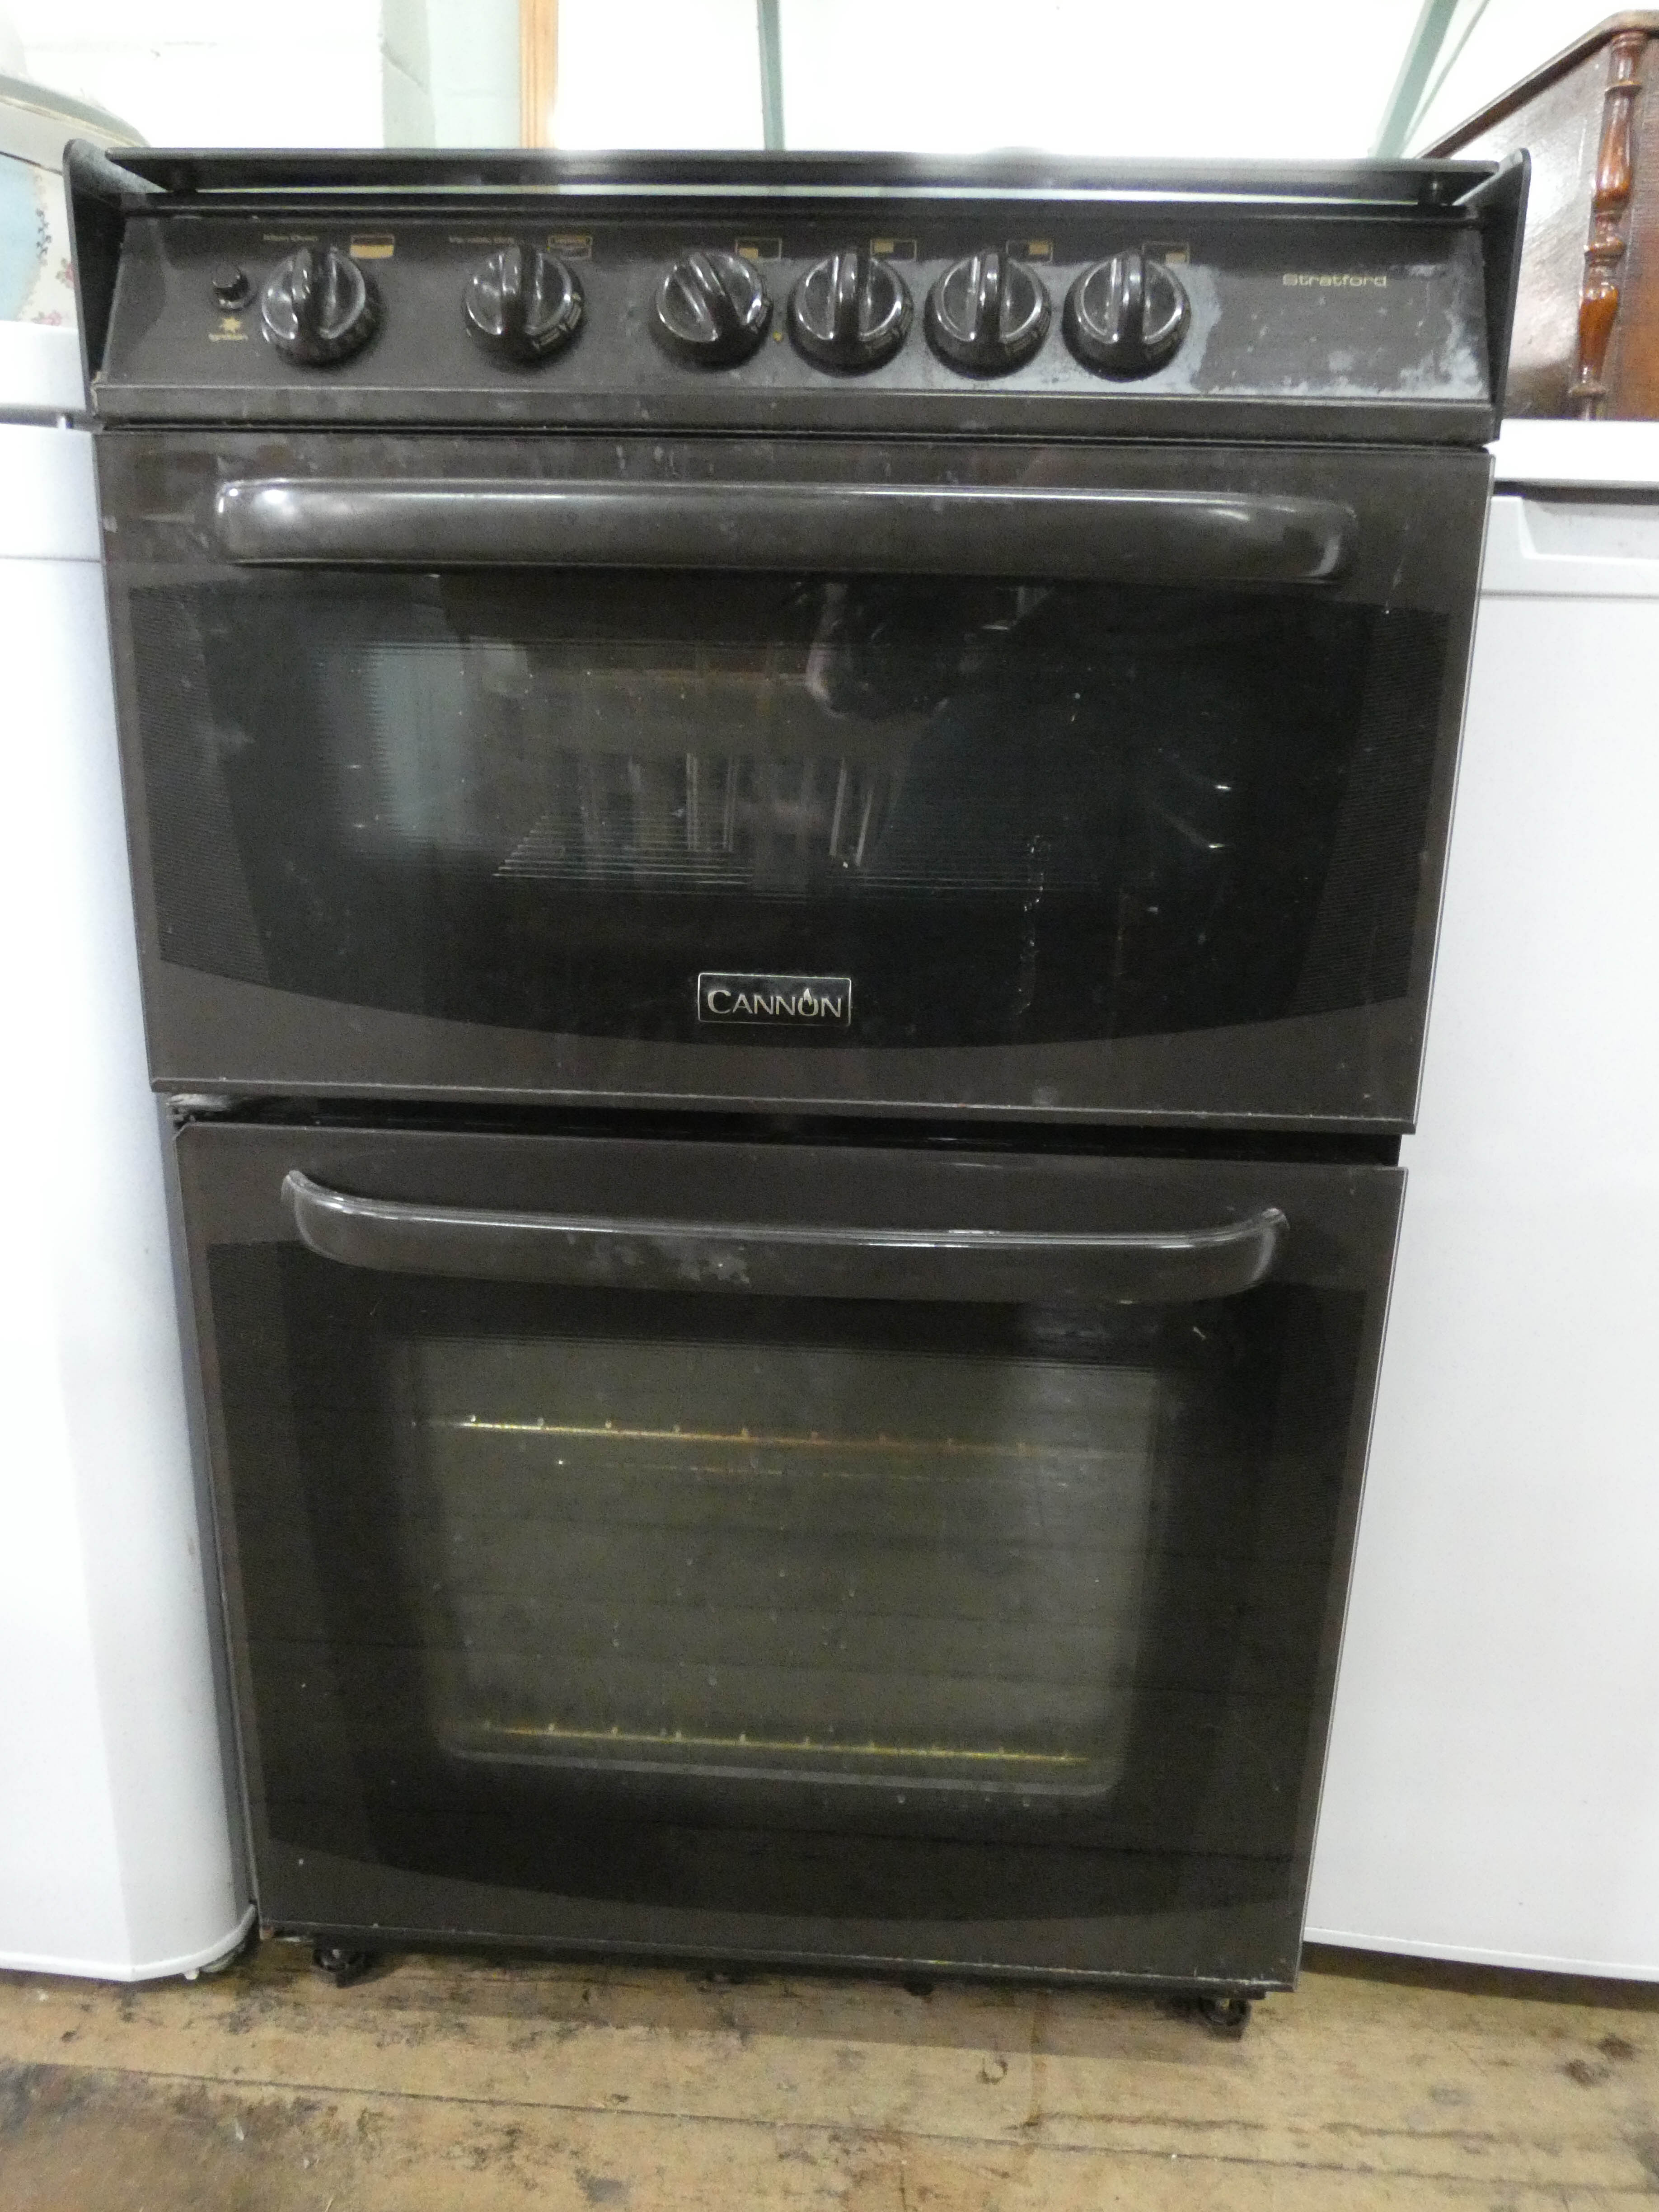 A Cannon four ring gas cooker in brown case with glass cover top